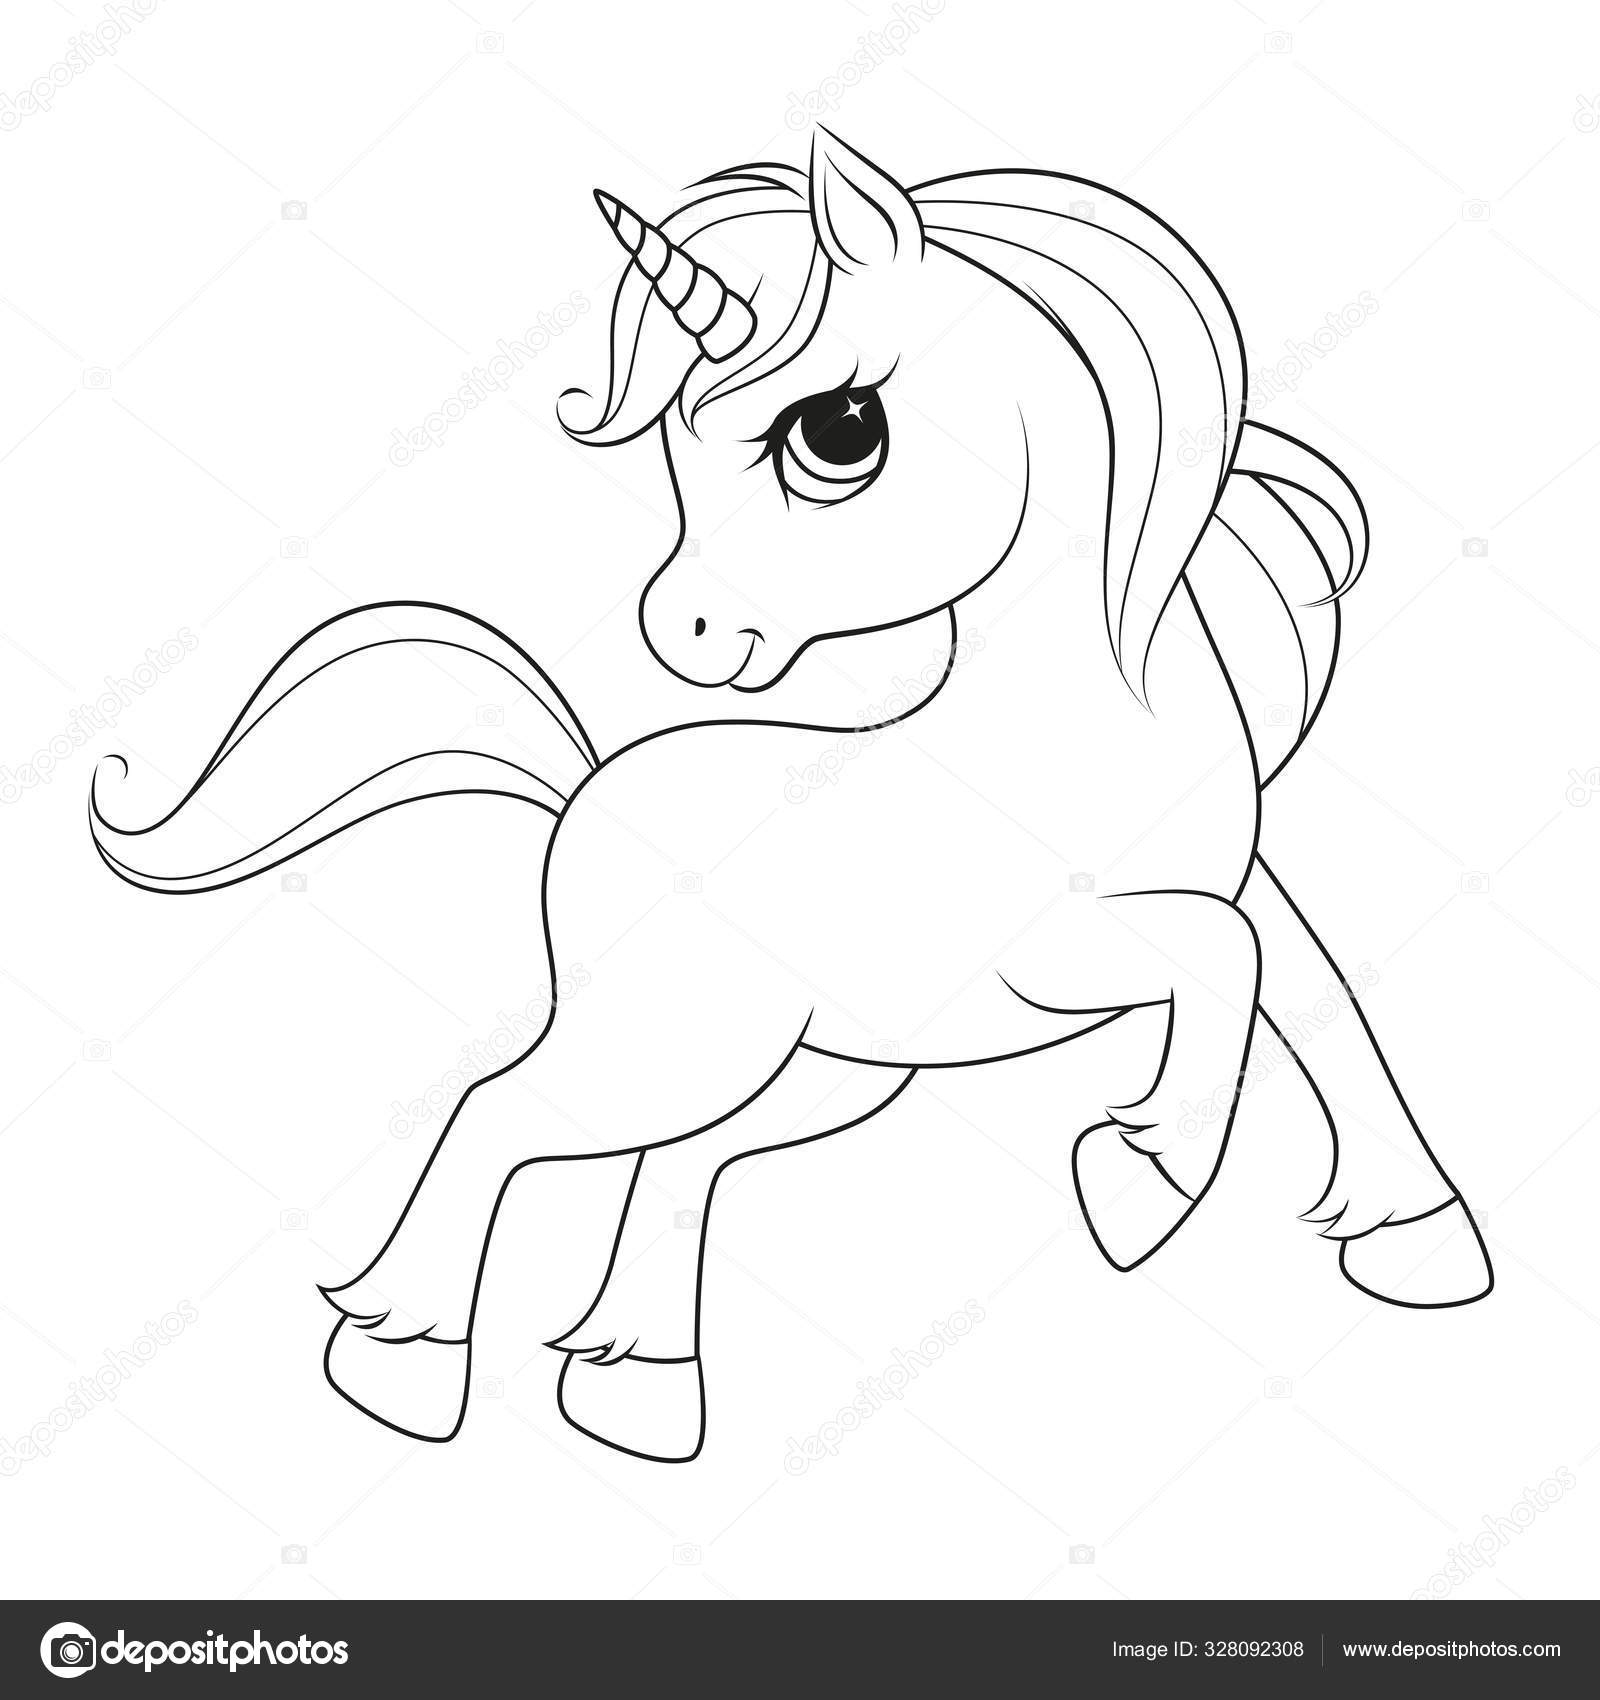 Cute cartoon unicorn. Black and white vector illustration for coloring ...